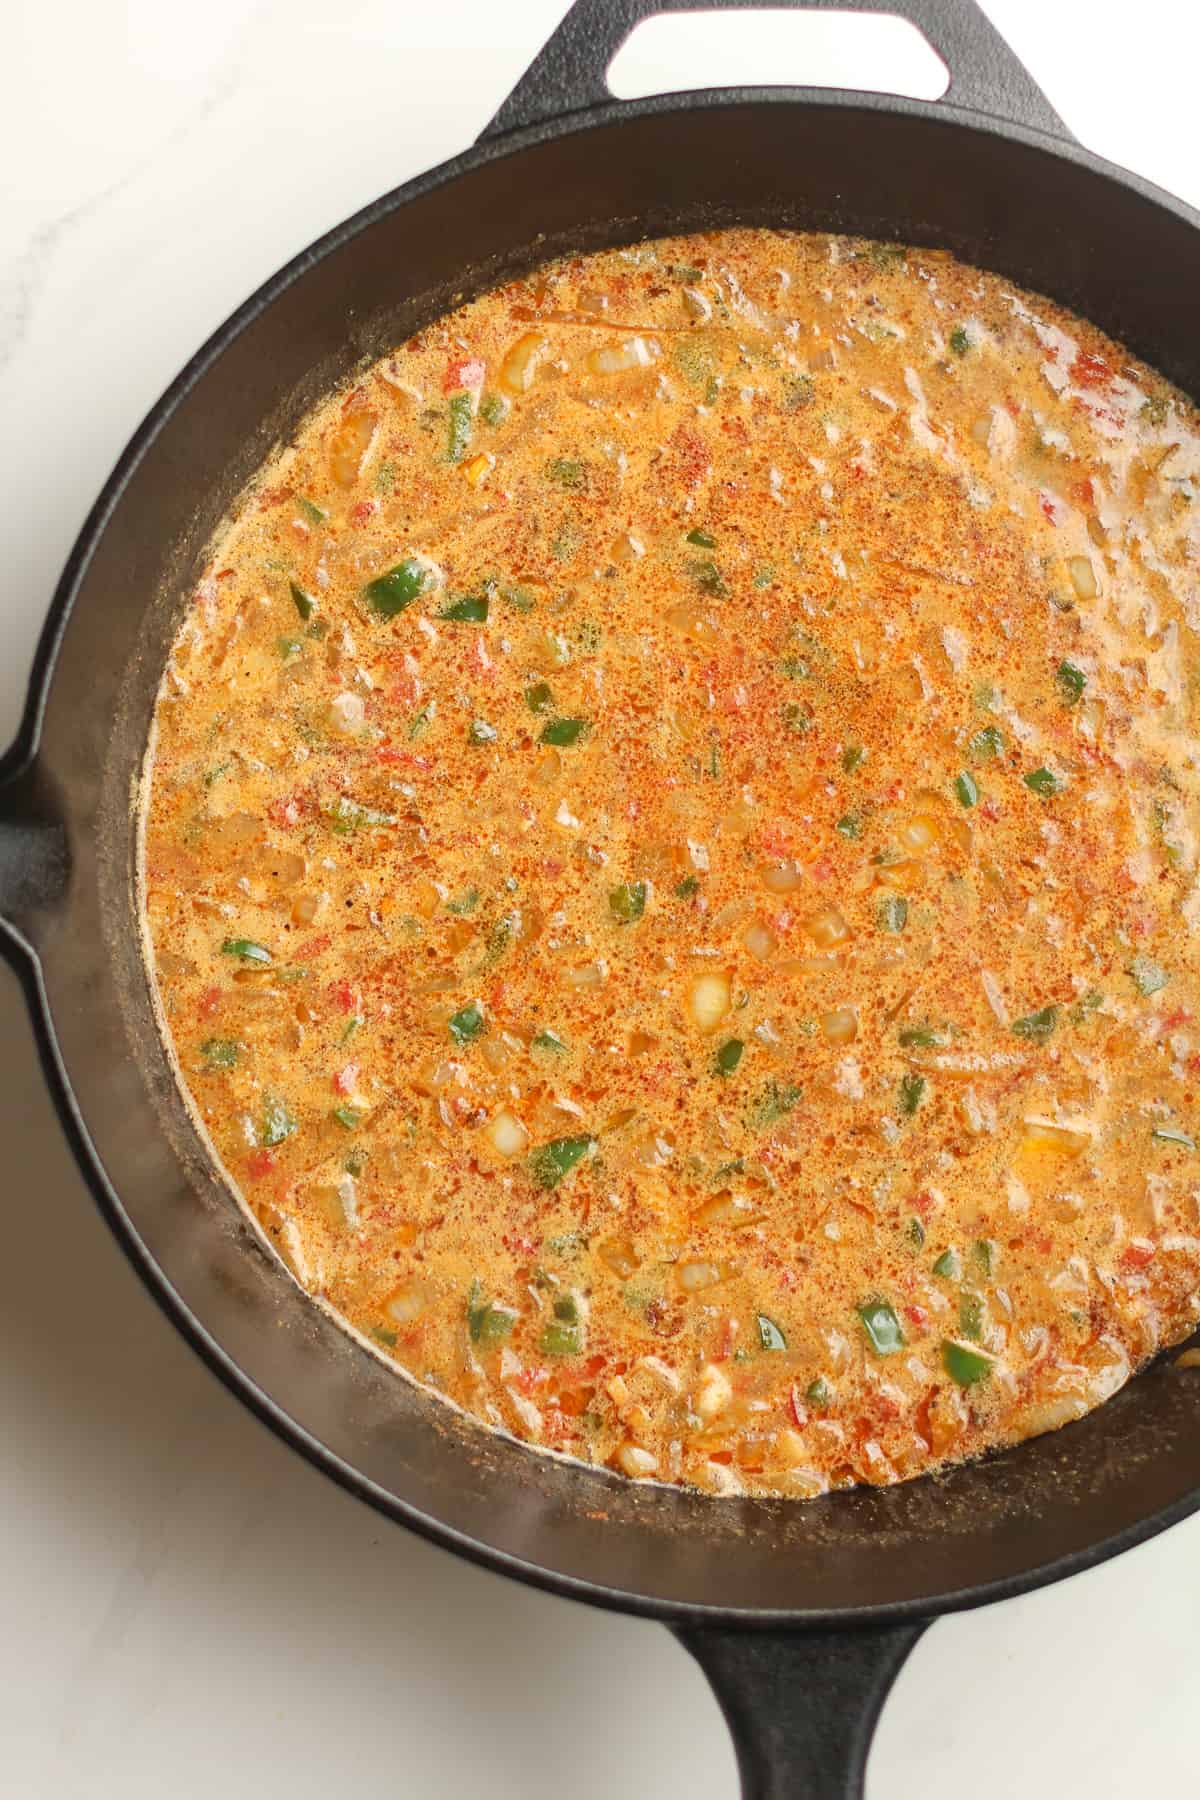 A skillet of the sauce before adding cheese.